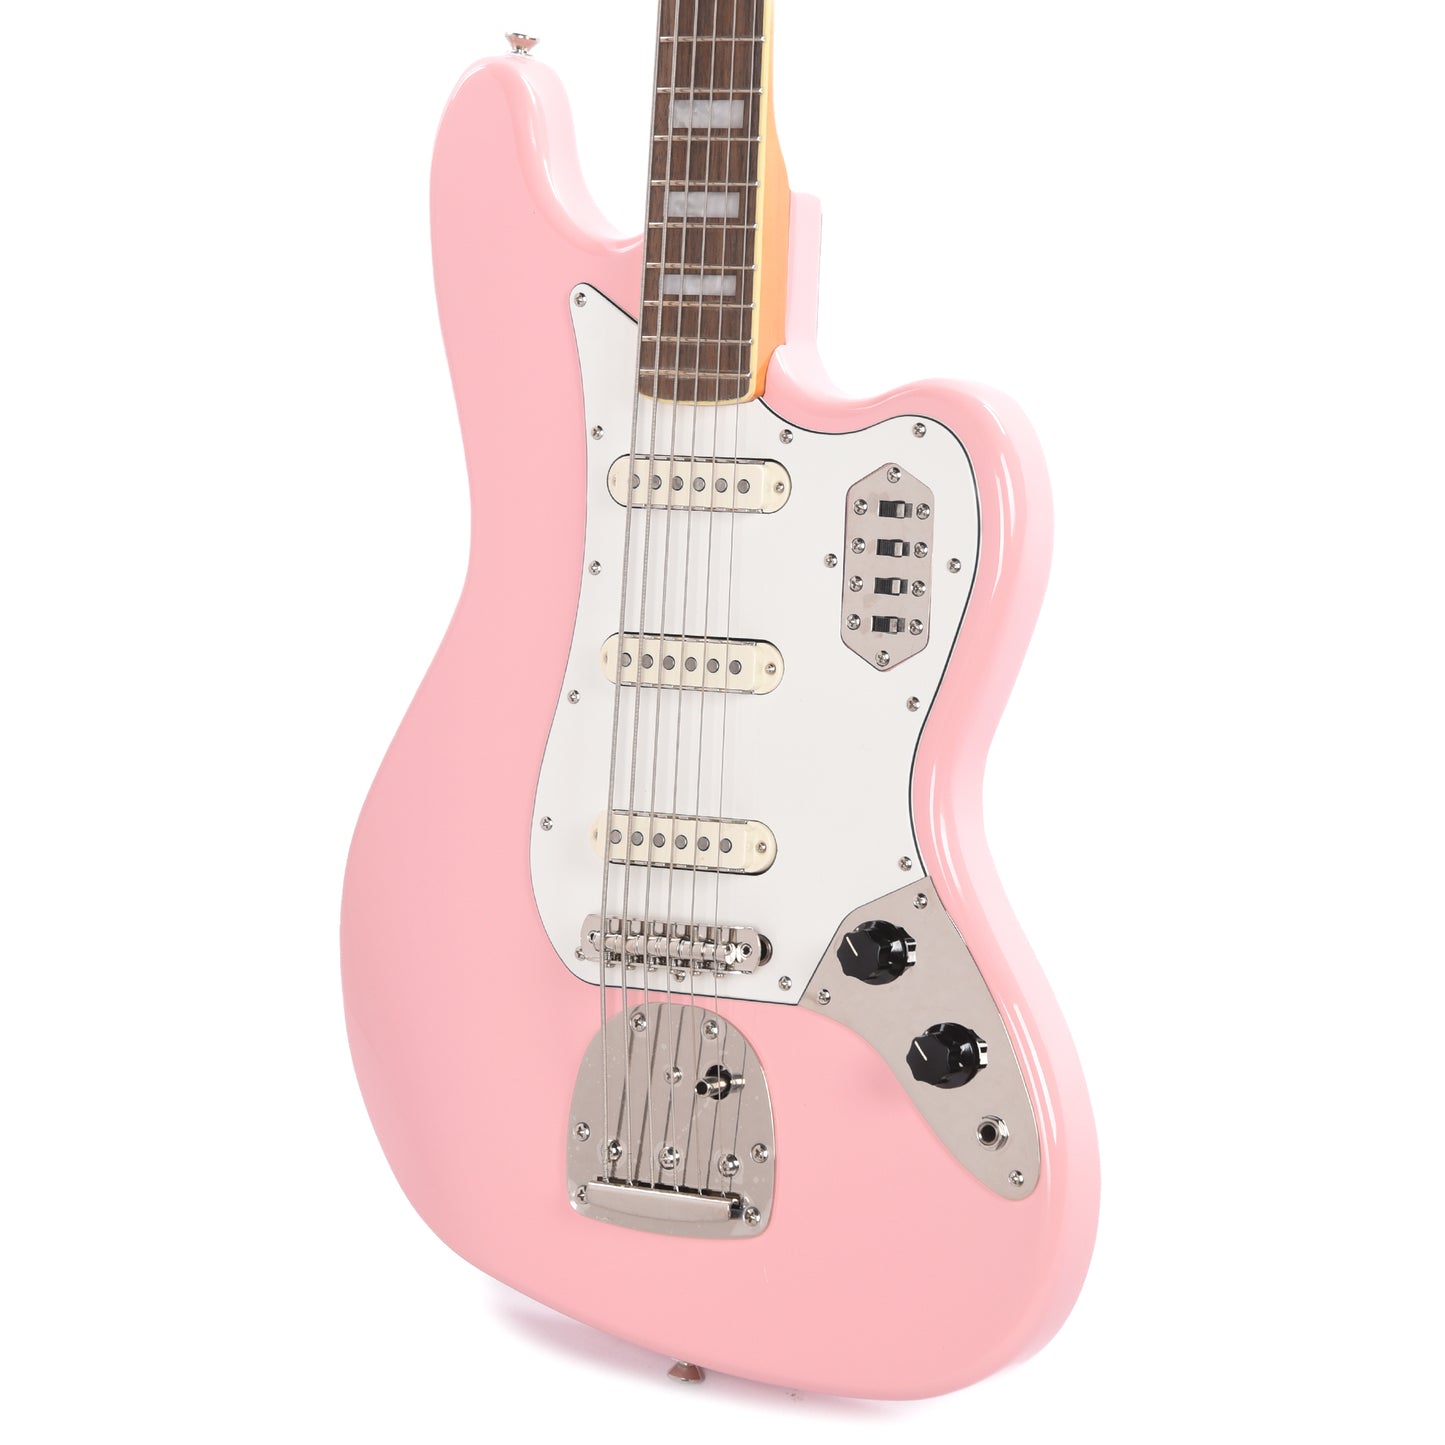 Squier Classic Vibe Bass VI Shell Pink w/Matching Headcap & 3-Ply Parchment Pickguard